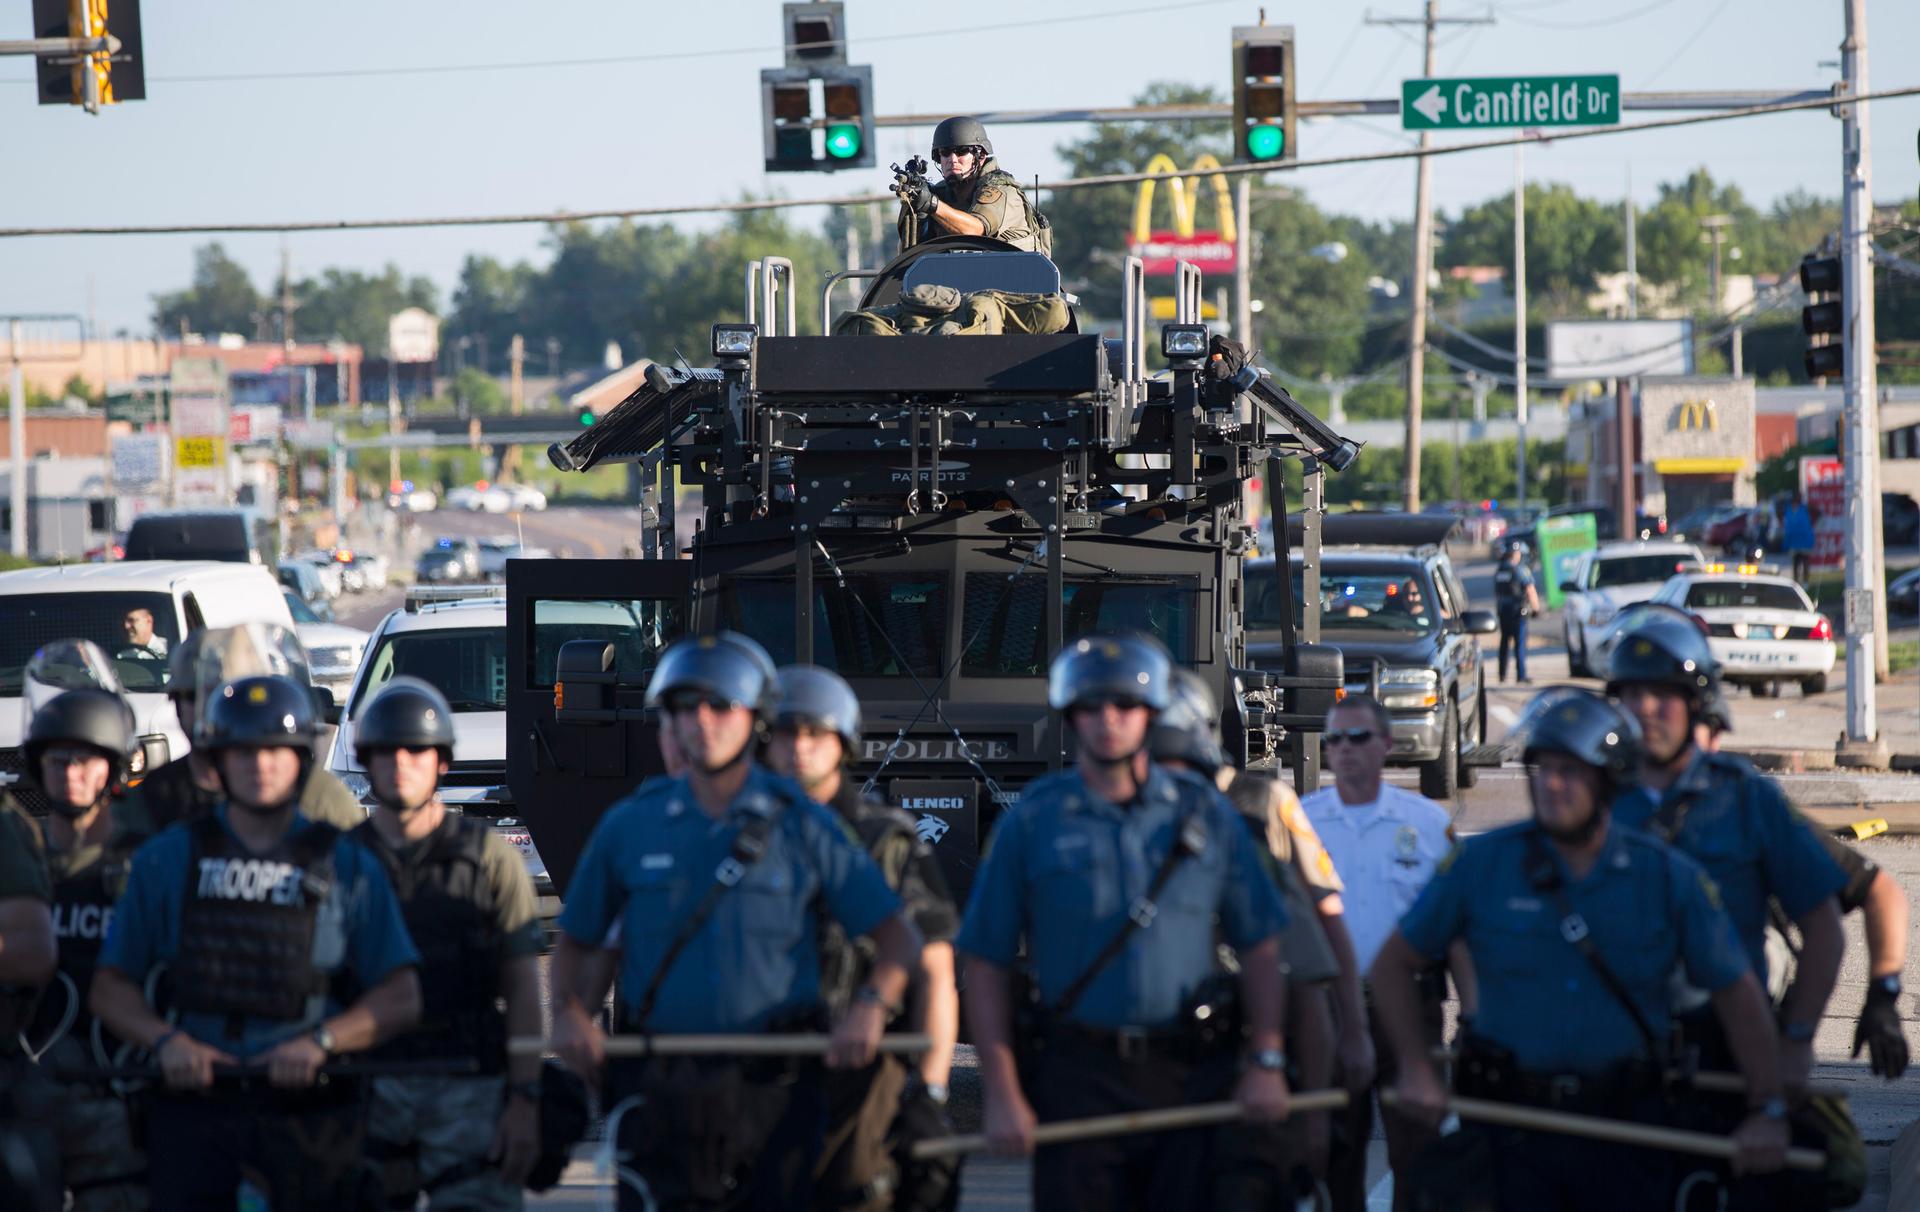 Riot police stand guard as demonstrators protest the shooting death of teenager Michael Brown in Ferguson, Missouri August 13, 2014.